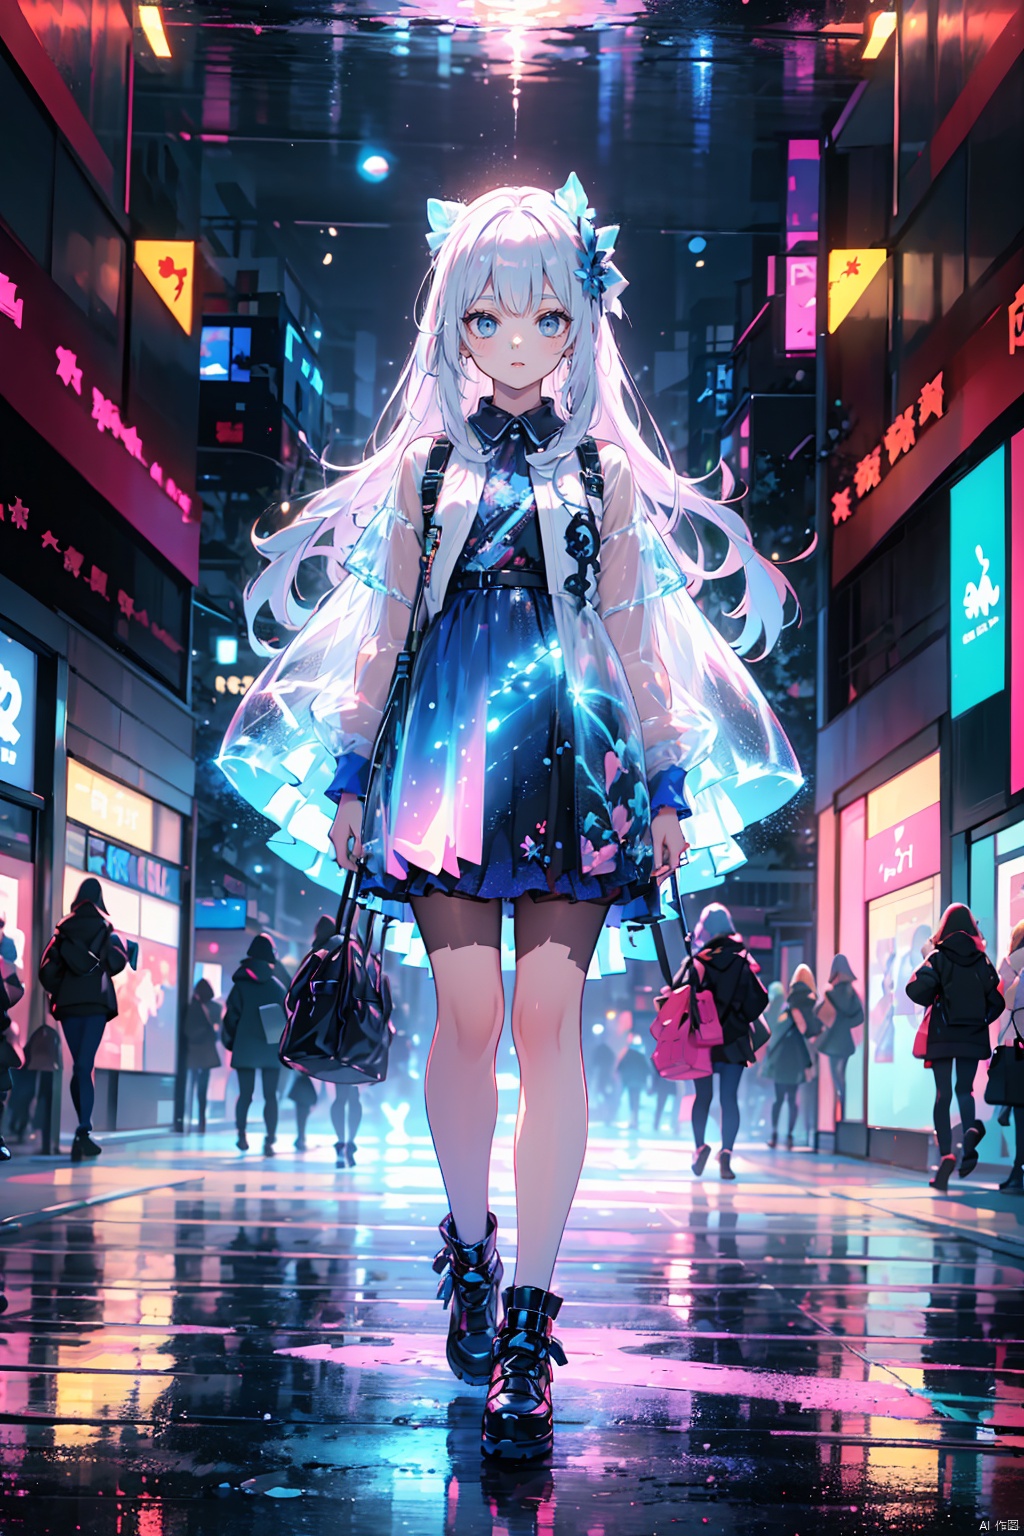  Masterpiece,High quality,Surreal,Multiple exposure scene,1 girl,Mechanical wings,Woman's figure,Intertwined,Extreme detailed,Celestial patterns,Conveying,Sense of cosmic connection,Science fiction,Electric particle effect, ethereal dragon, sky, 1girl